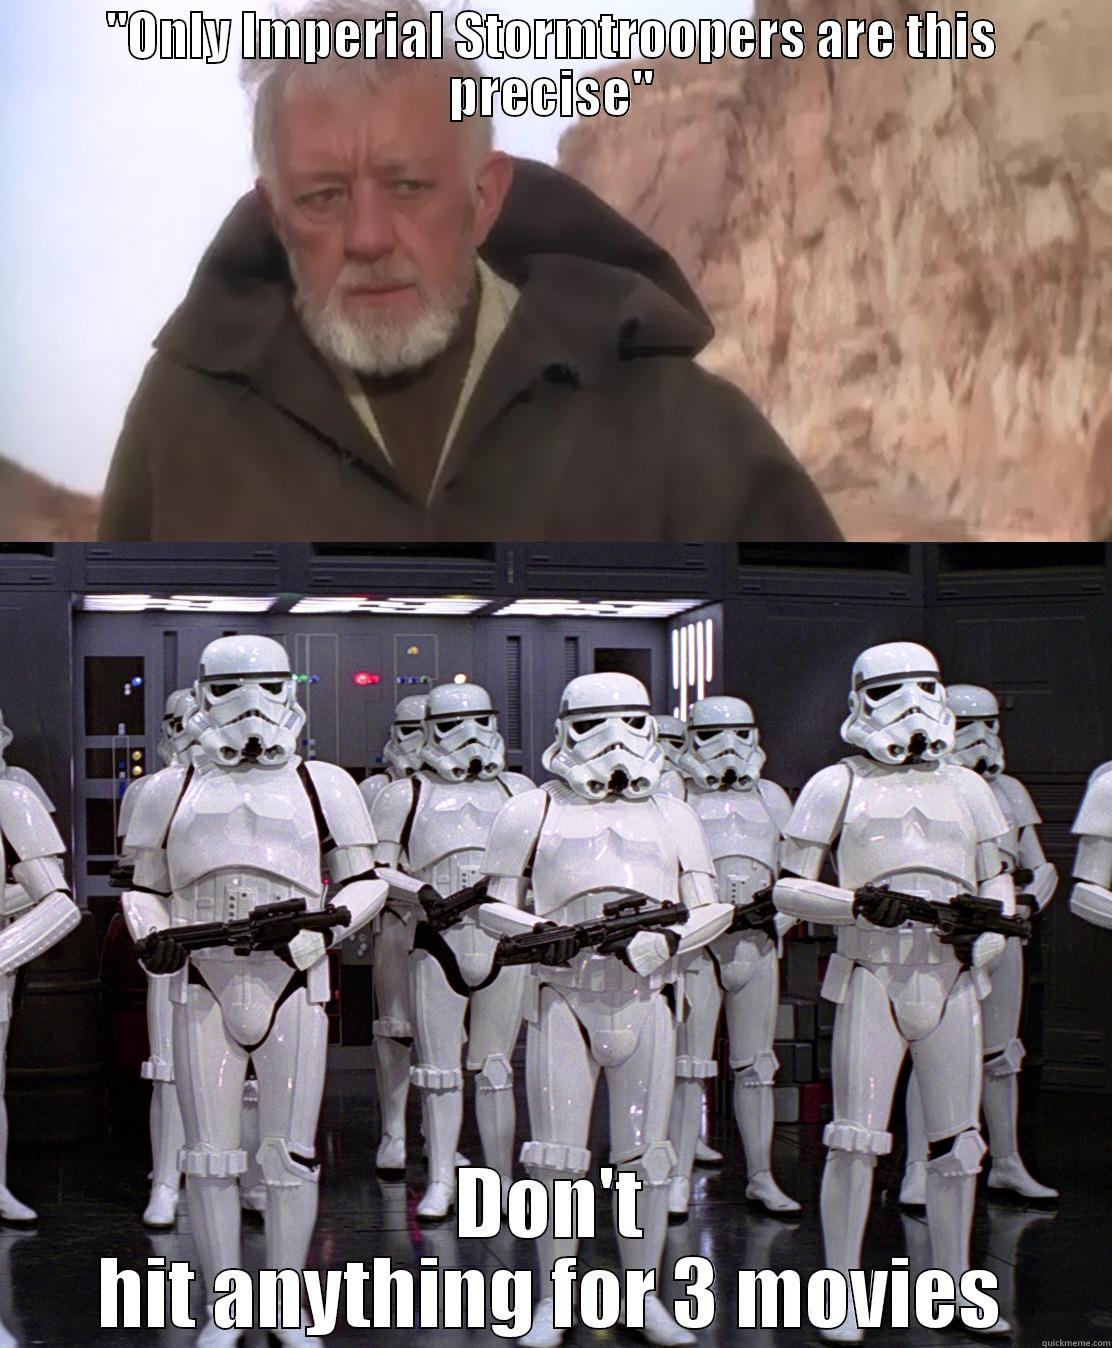 Stormtroopers can't aim - 